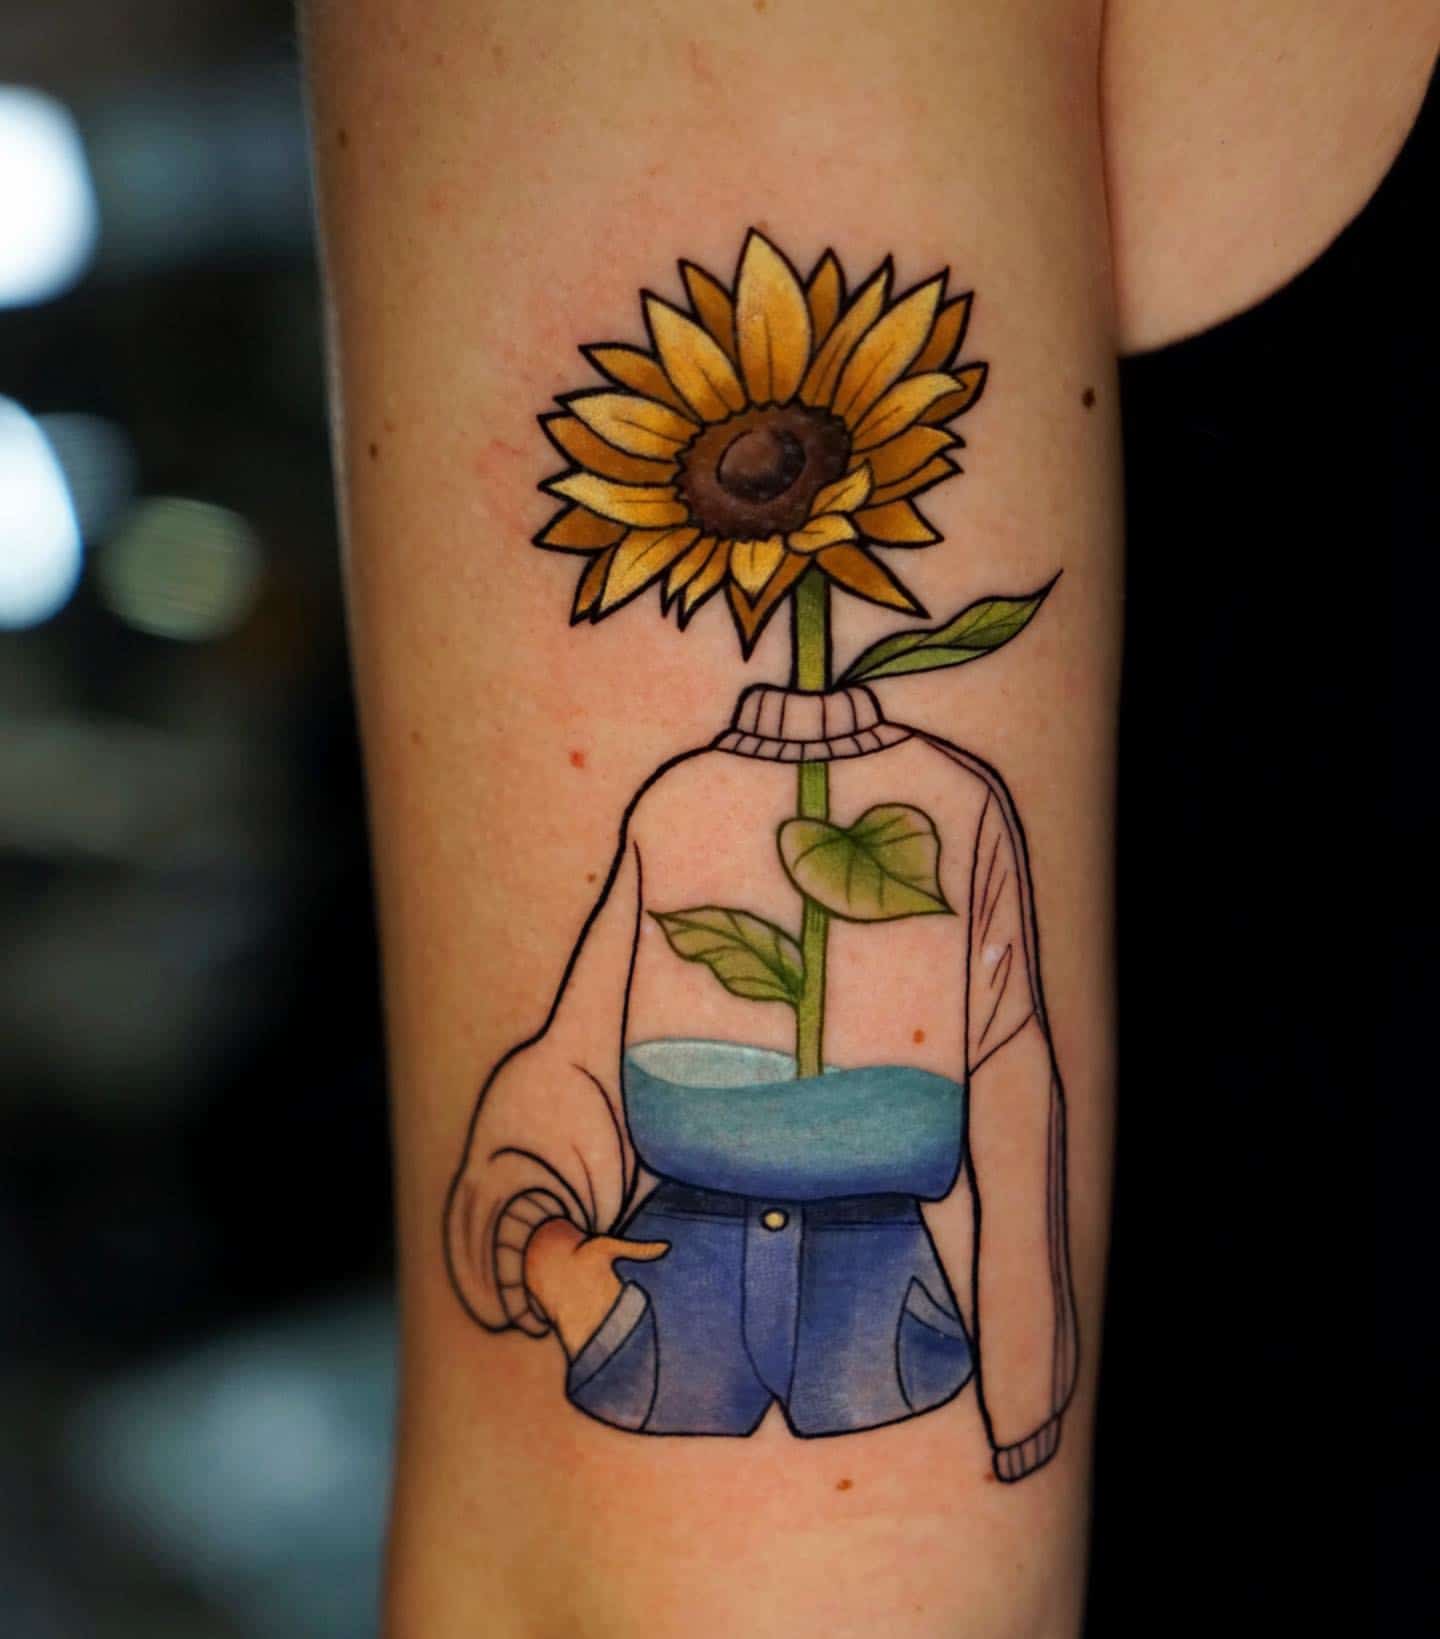 Sunflower Tattoo Meaning and Design Ideas  TatRing